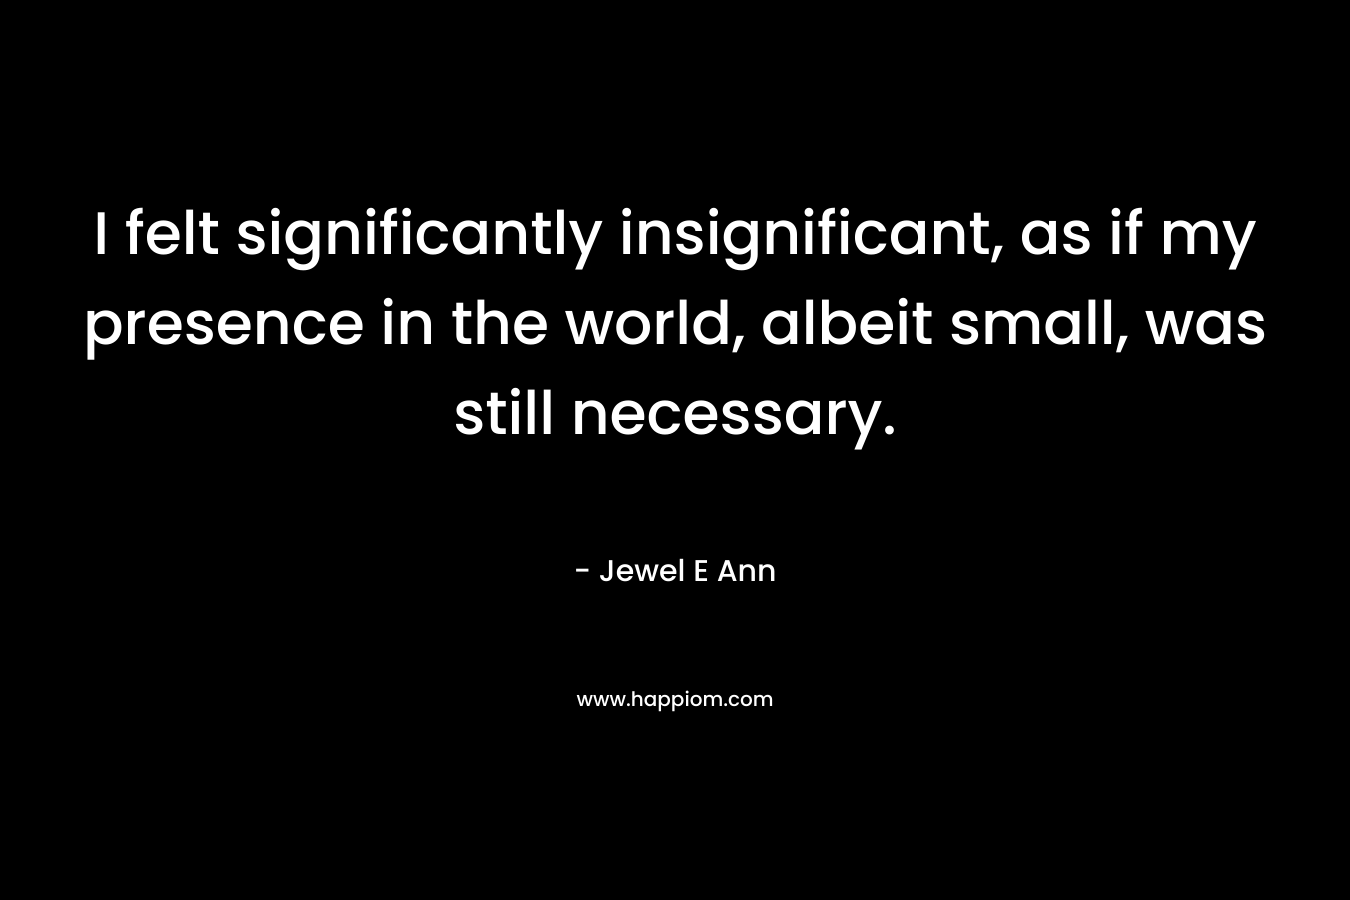 I felt significantly insignificant, as if my presence in the world, albeit small, was still necessary. – Jewel E Ann